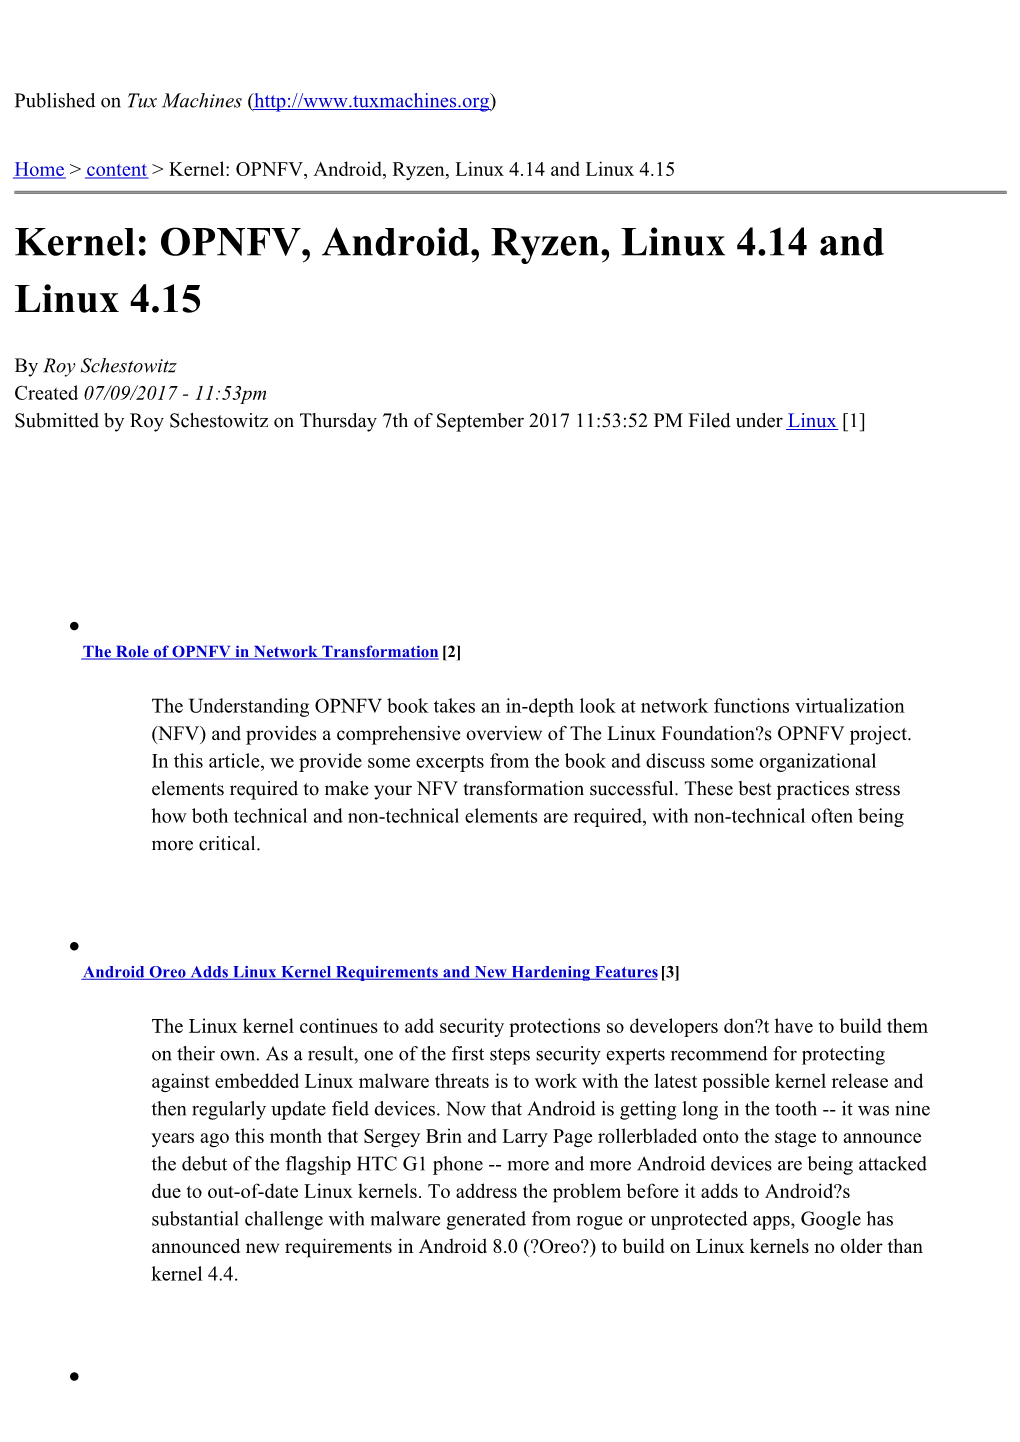 Kernel: OPNFV, Android, Ryzen, Linux 4.14 and Linux 4.15